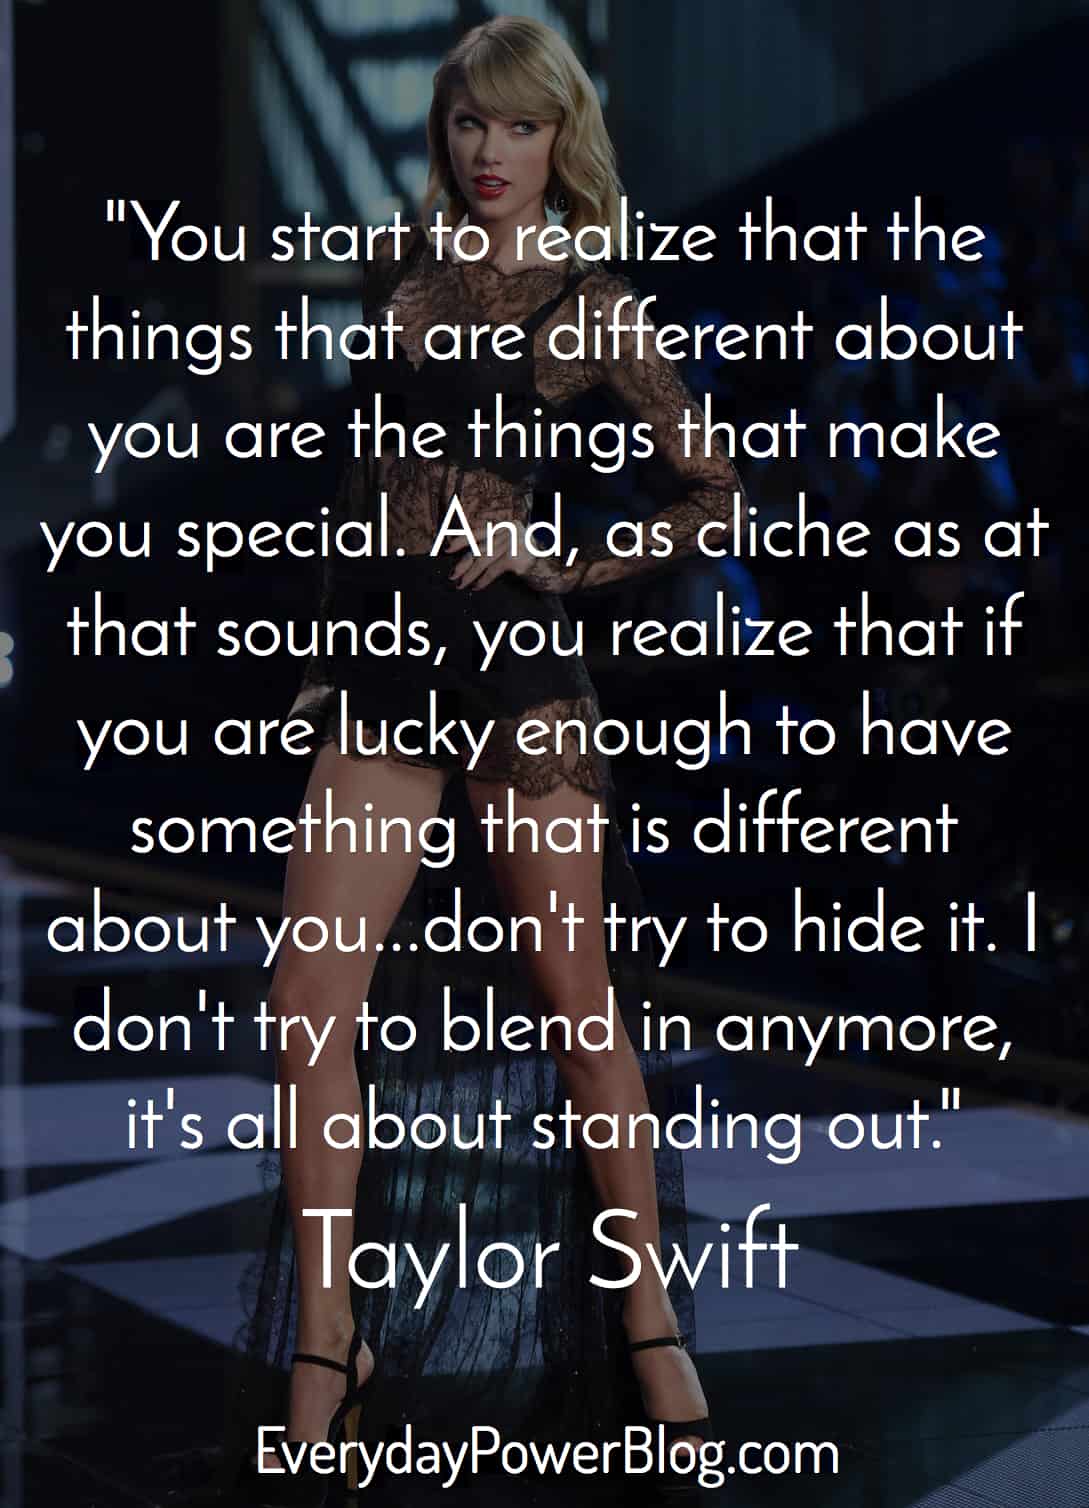 Inspirational Taylor Swift Quotes About Loving Yourself